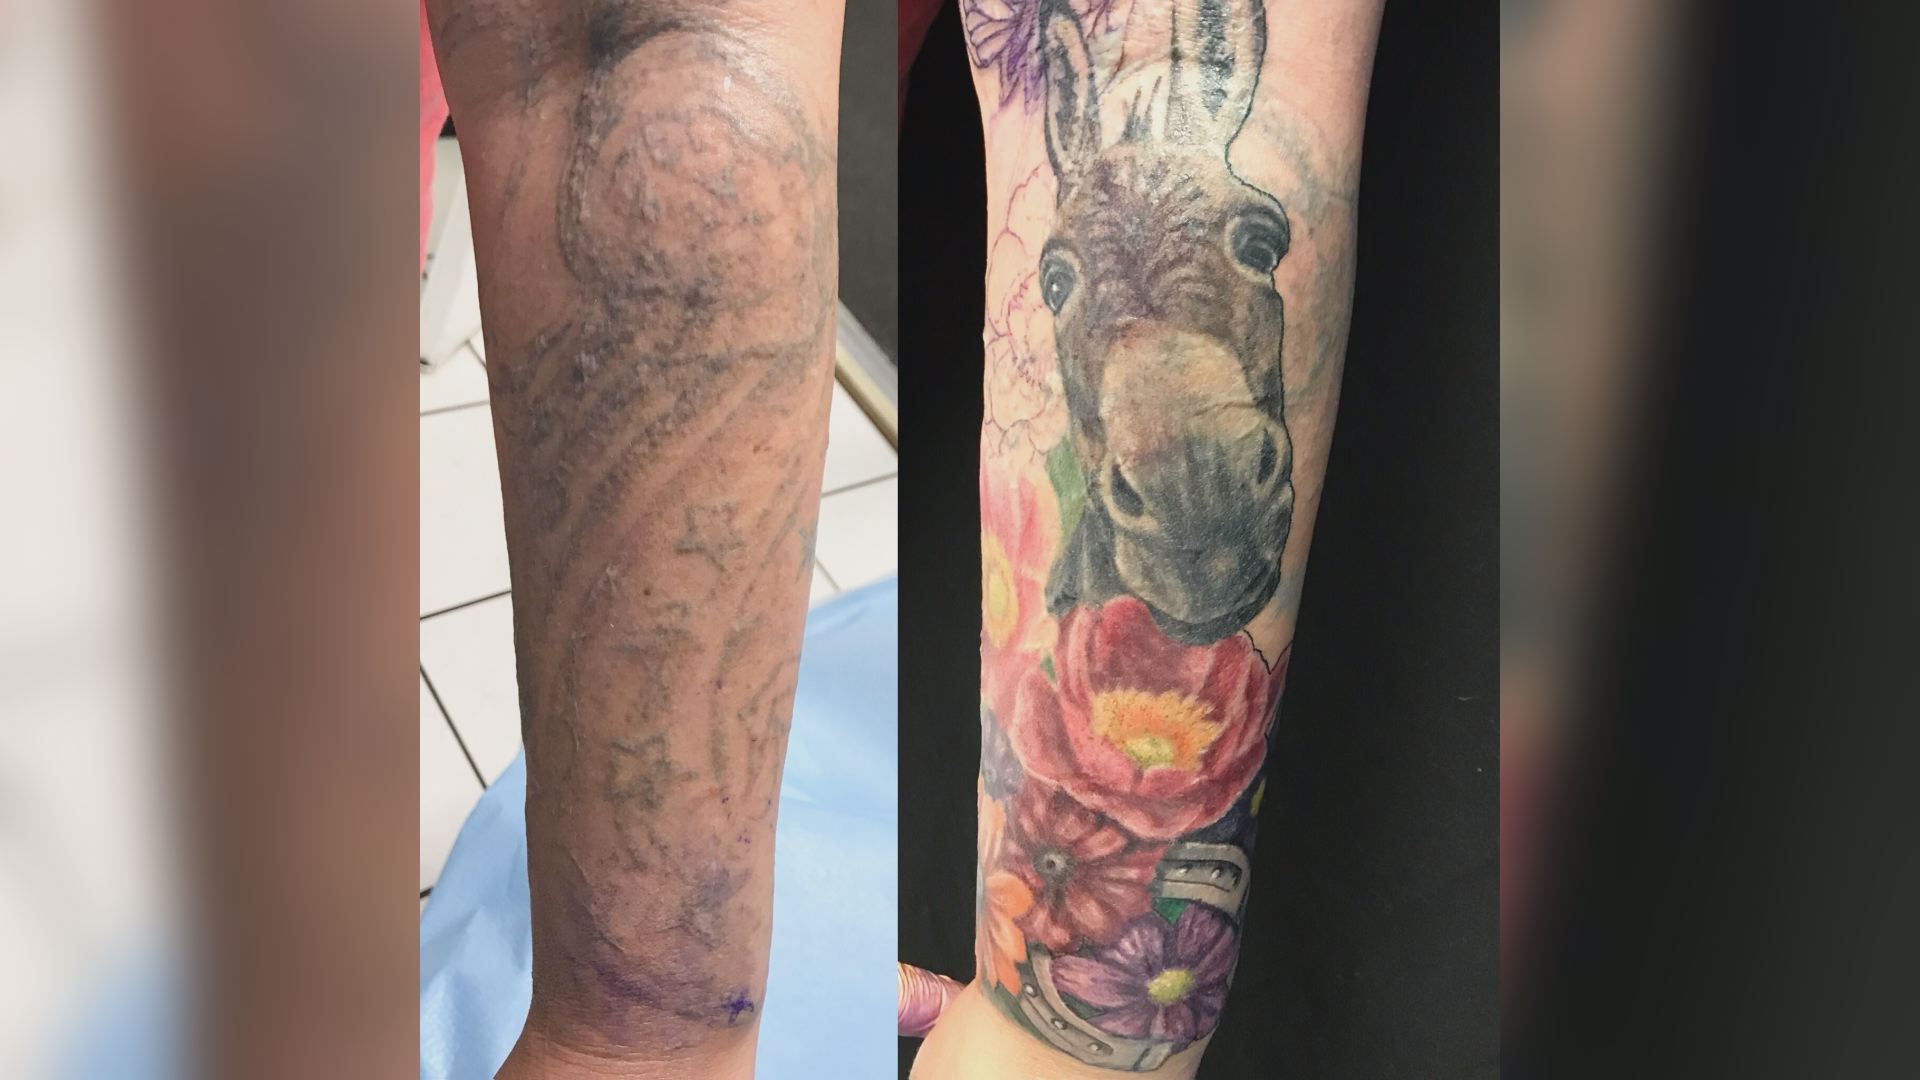 Foot tattoos/tattoos that cover scars?